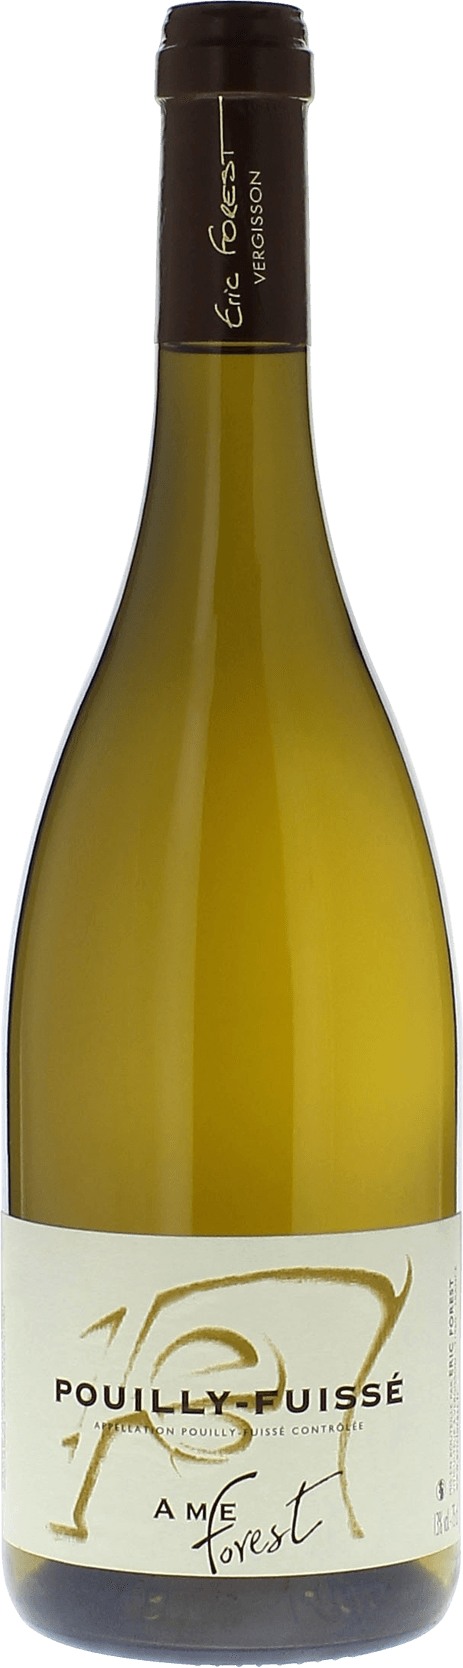 Pouilly fuiss ame 2017 Domaine Eric Forest, Bourgogne blanc